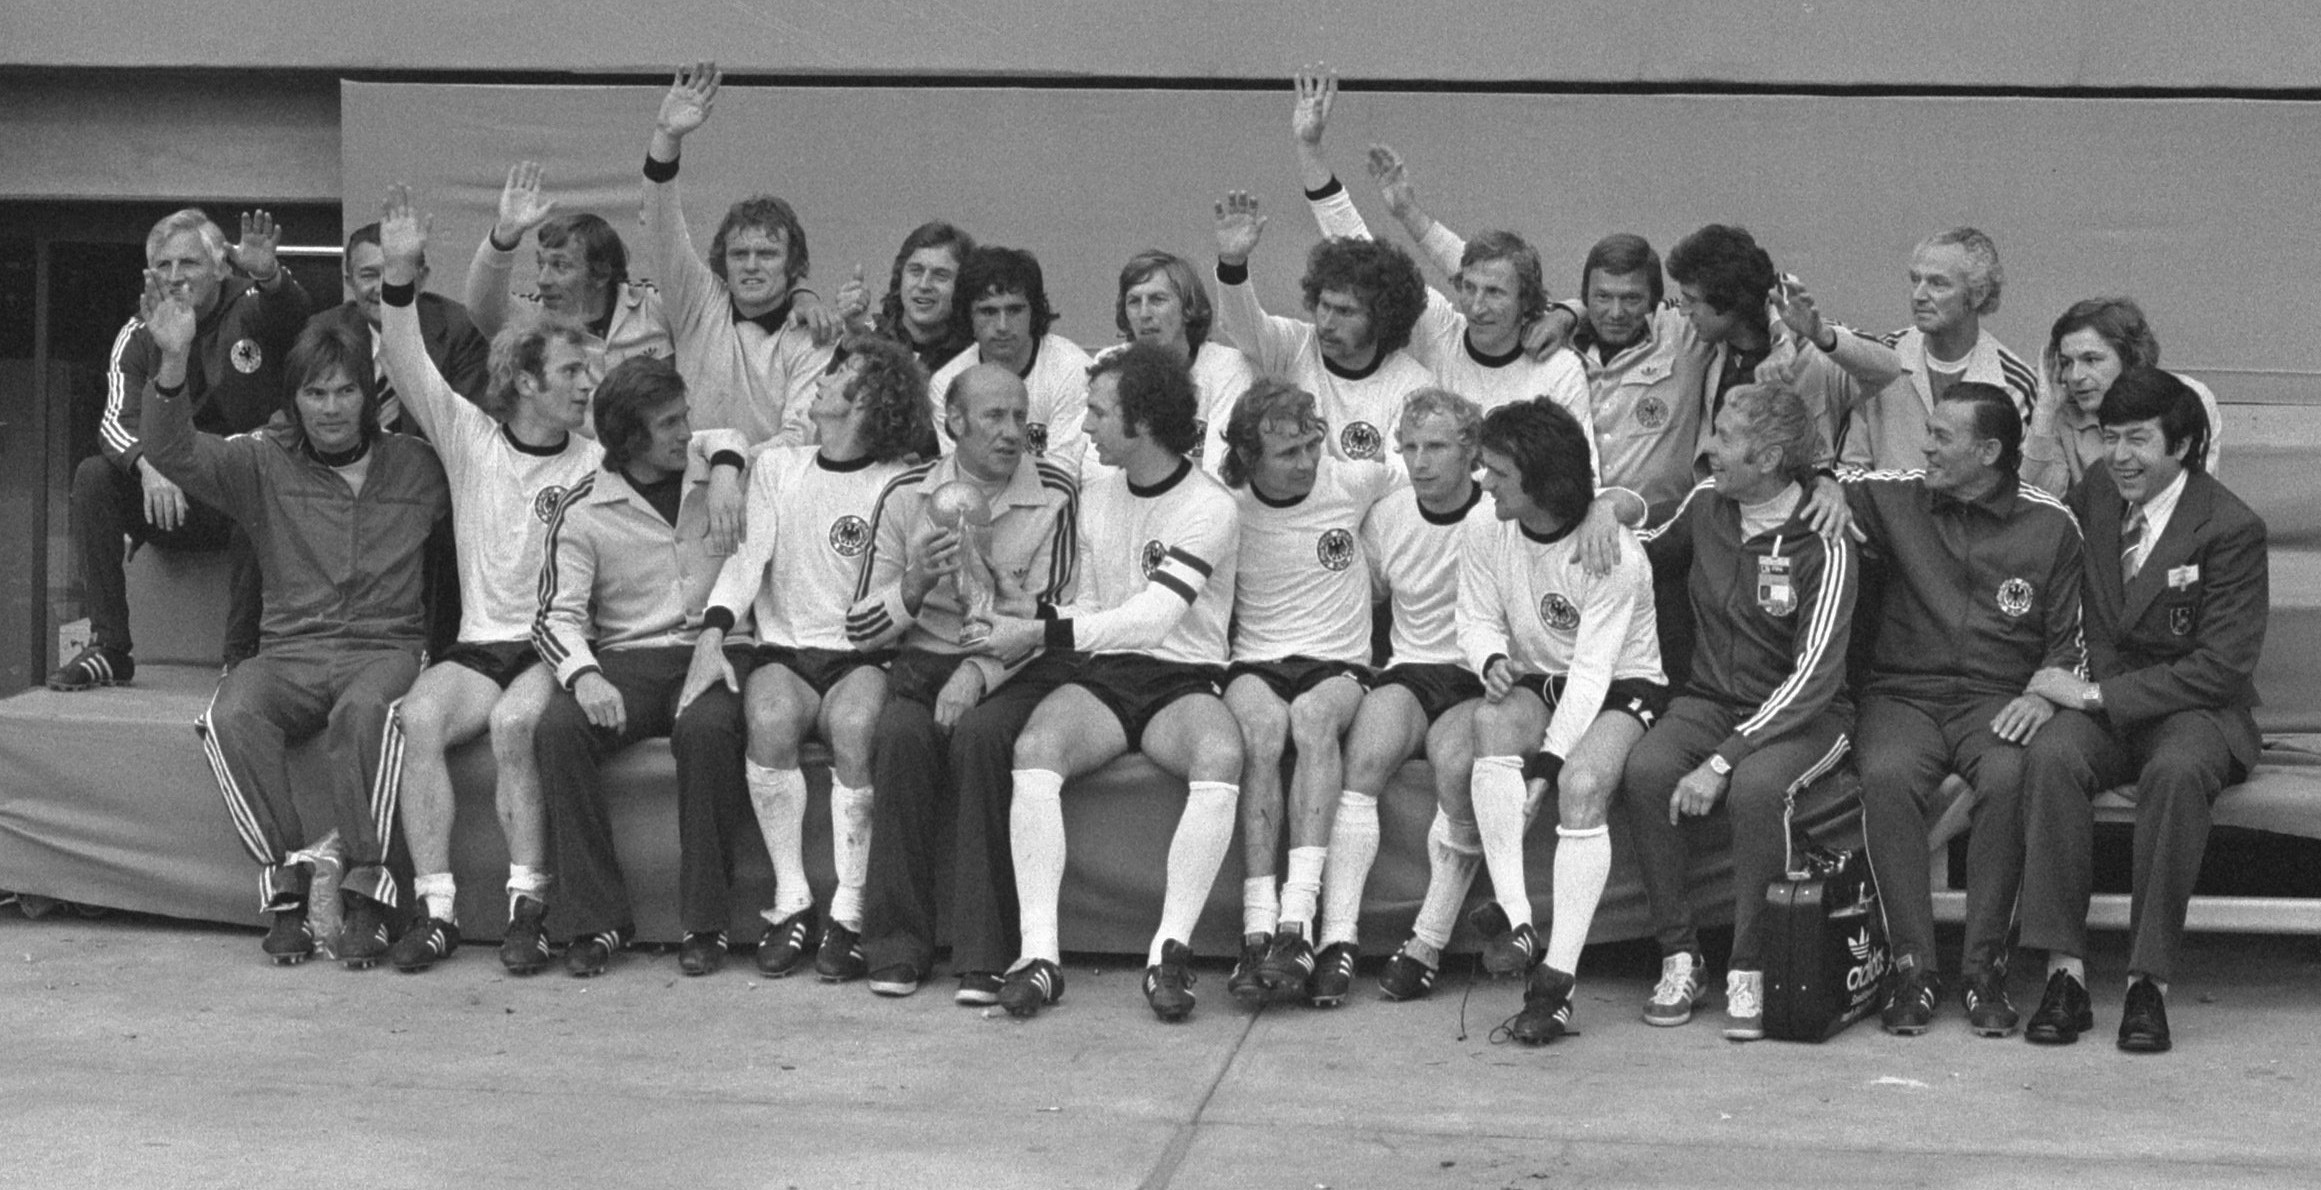 The West Germany team, winner of the 1974 FIFA World Cup